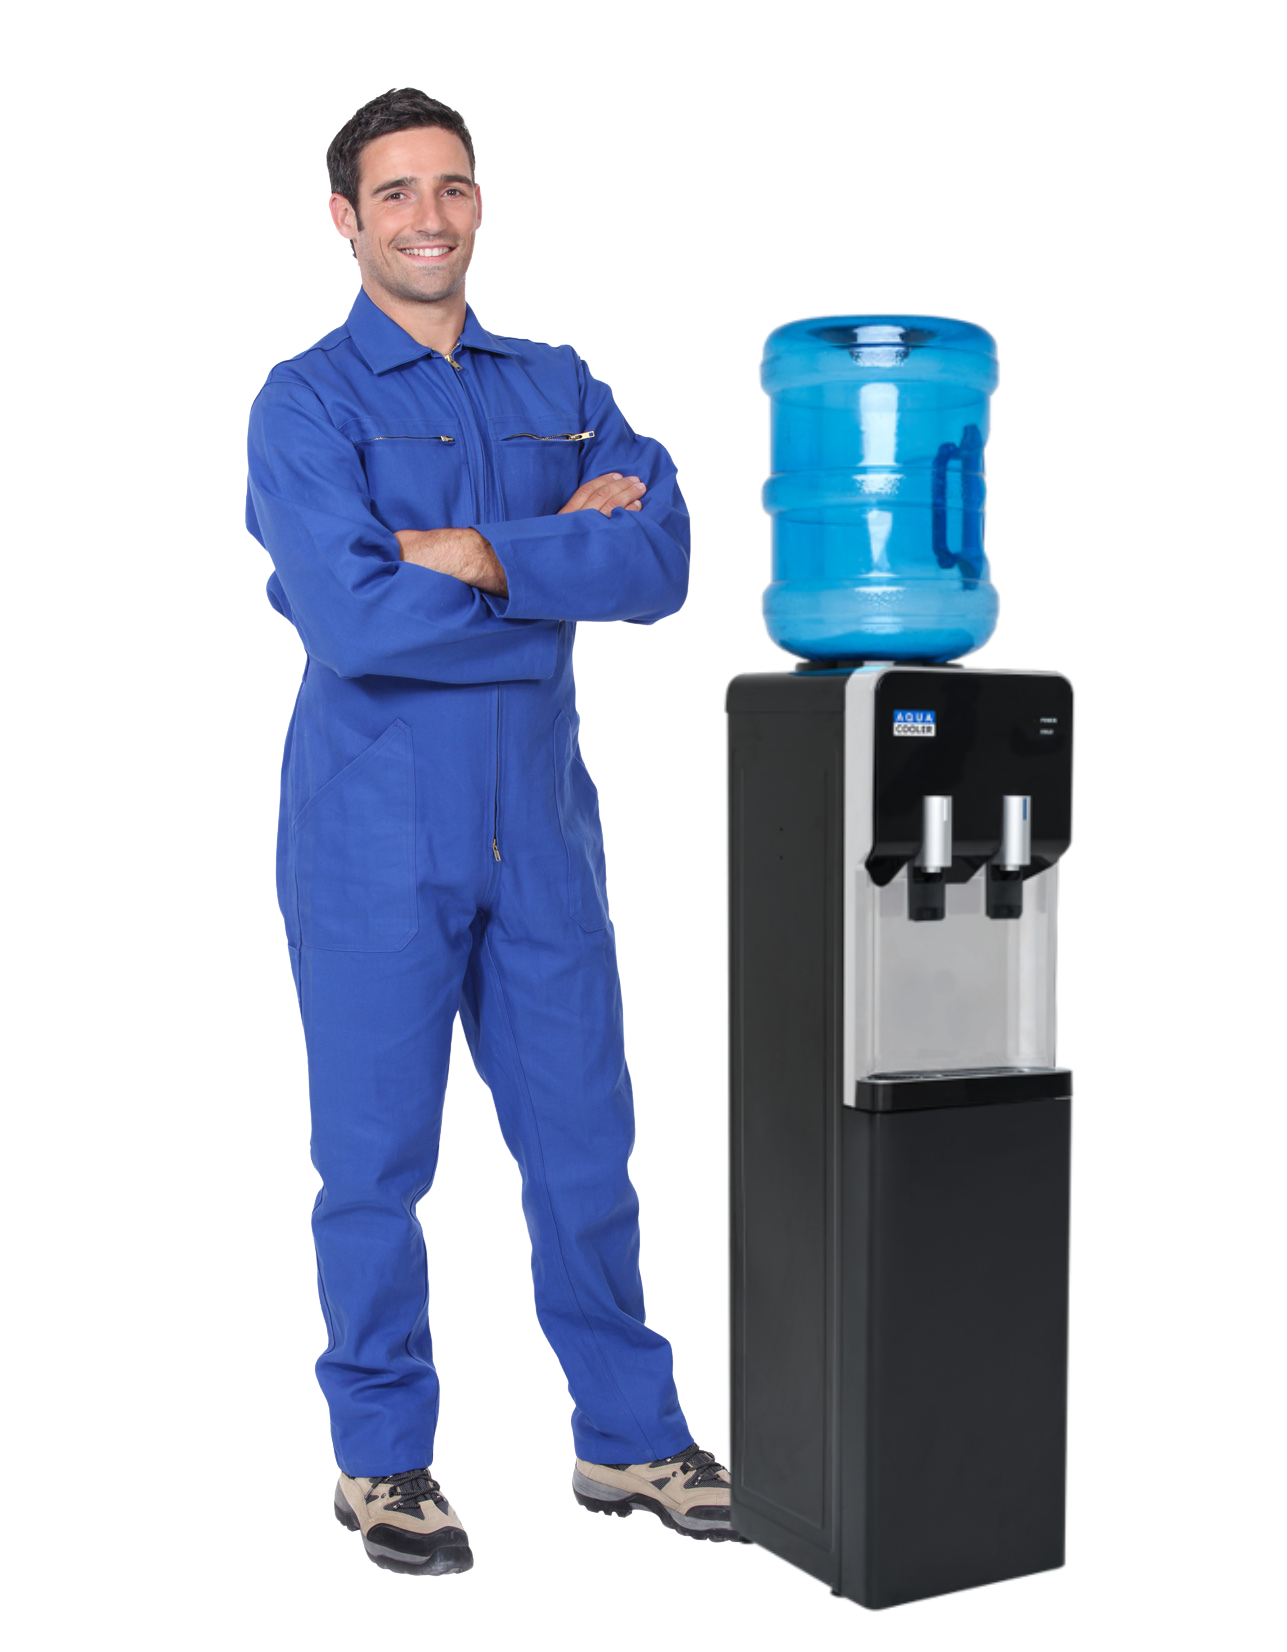 SEQ - Free Standing Refillable Cooler Service – Odyssey and Oasis Eco Models